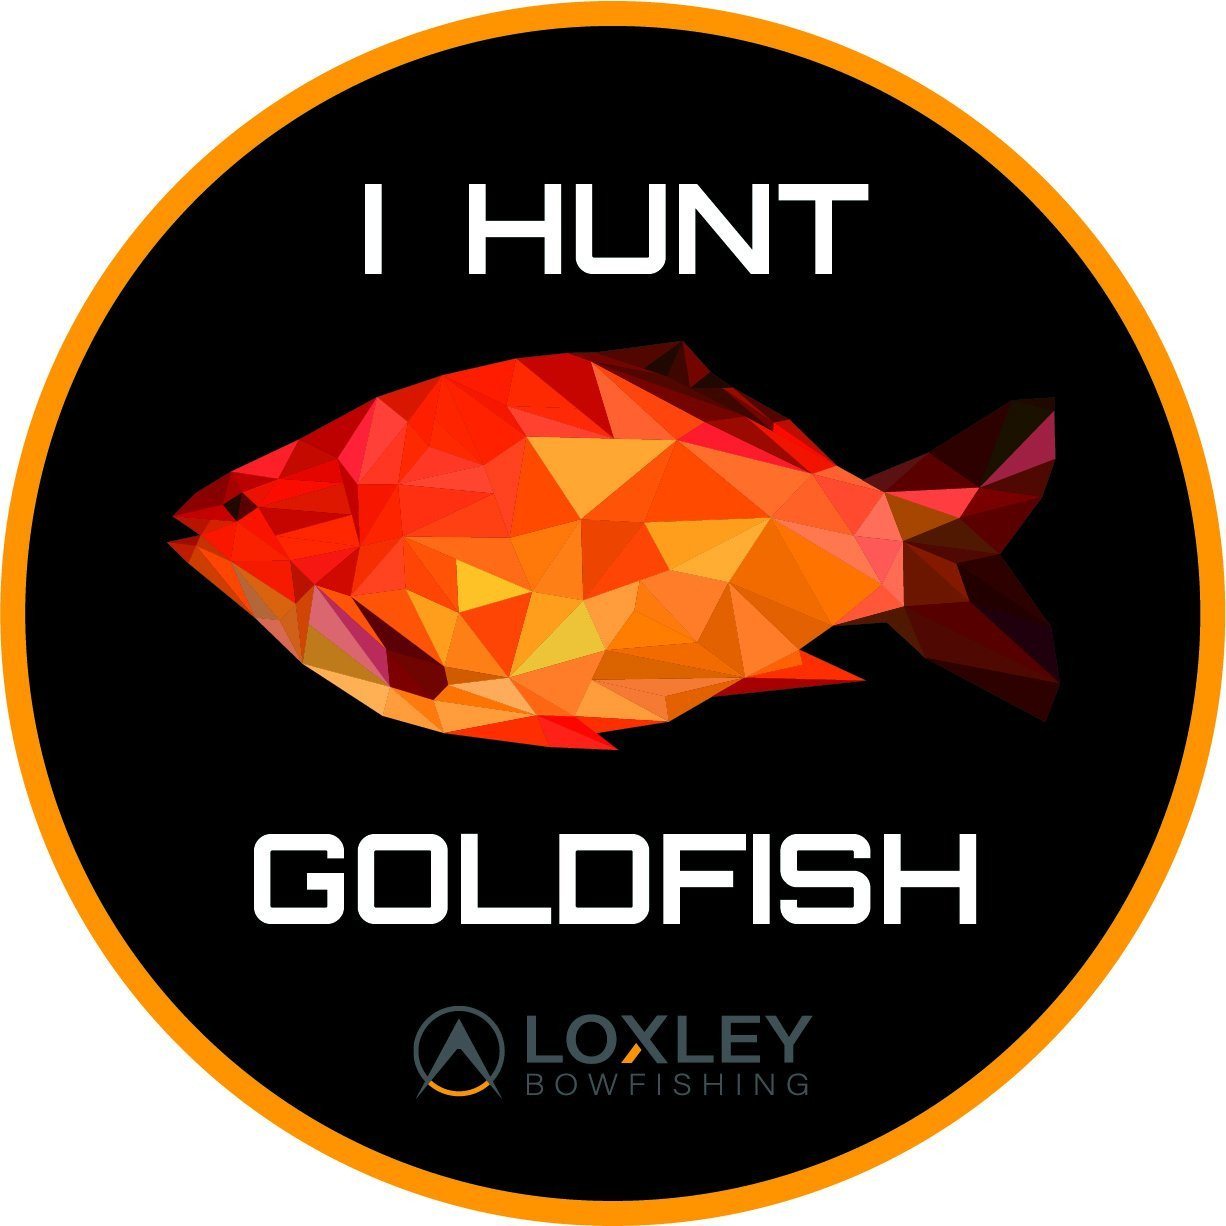 I HUNT GOLDFISH Sticker  Bowfishing Accessories for Sale